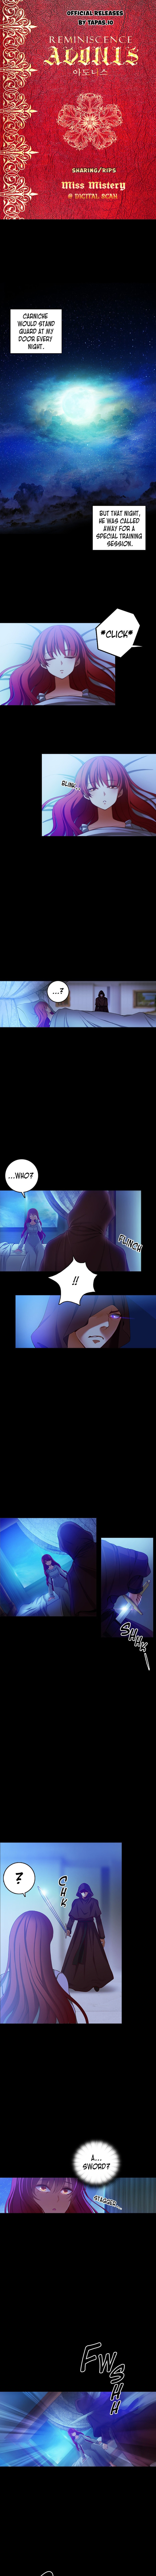 Reminiscence Adonis - Page 1